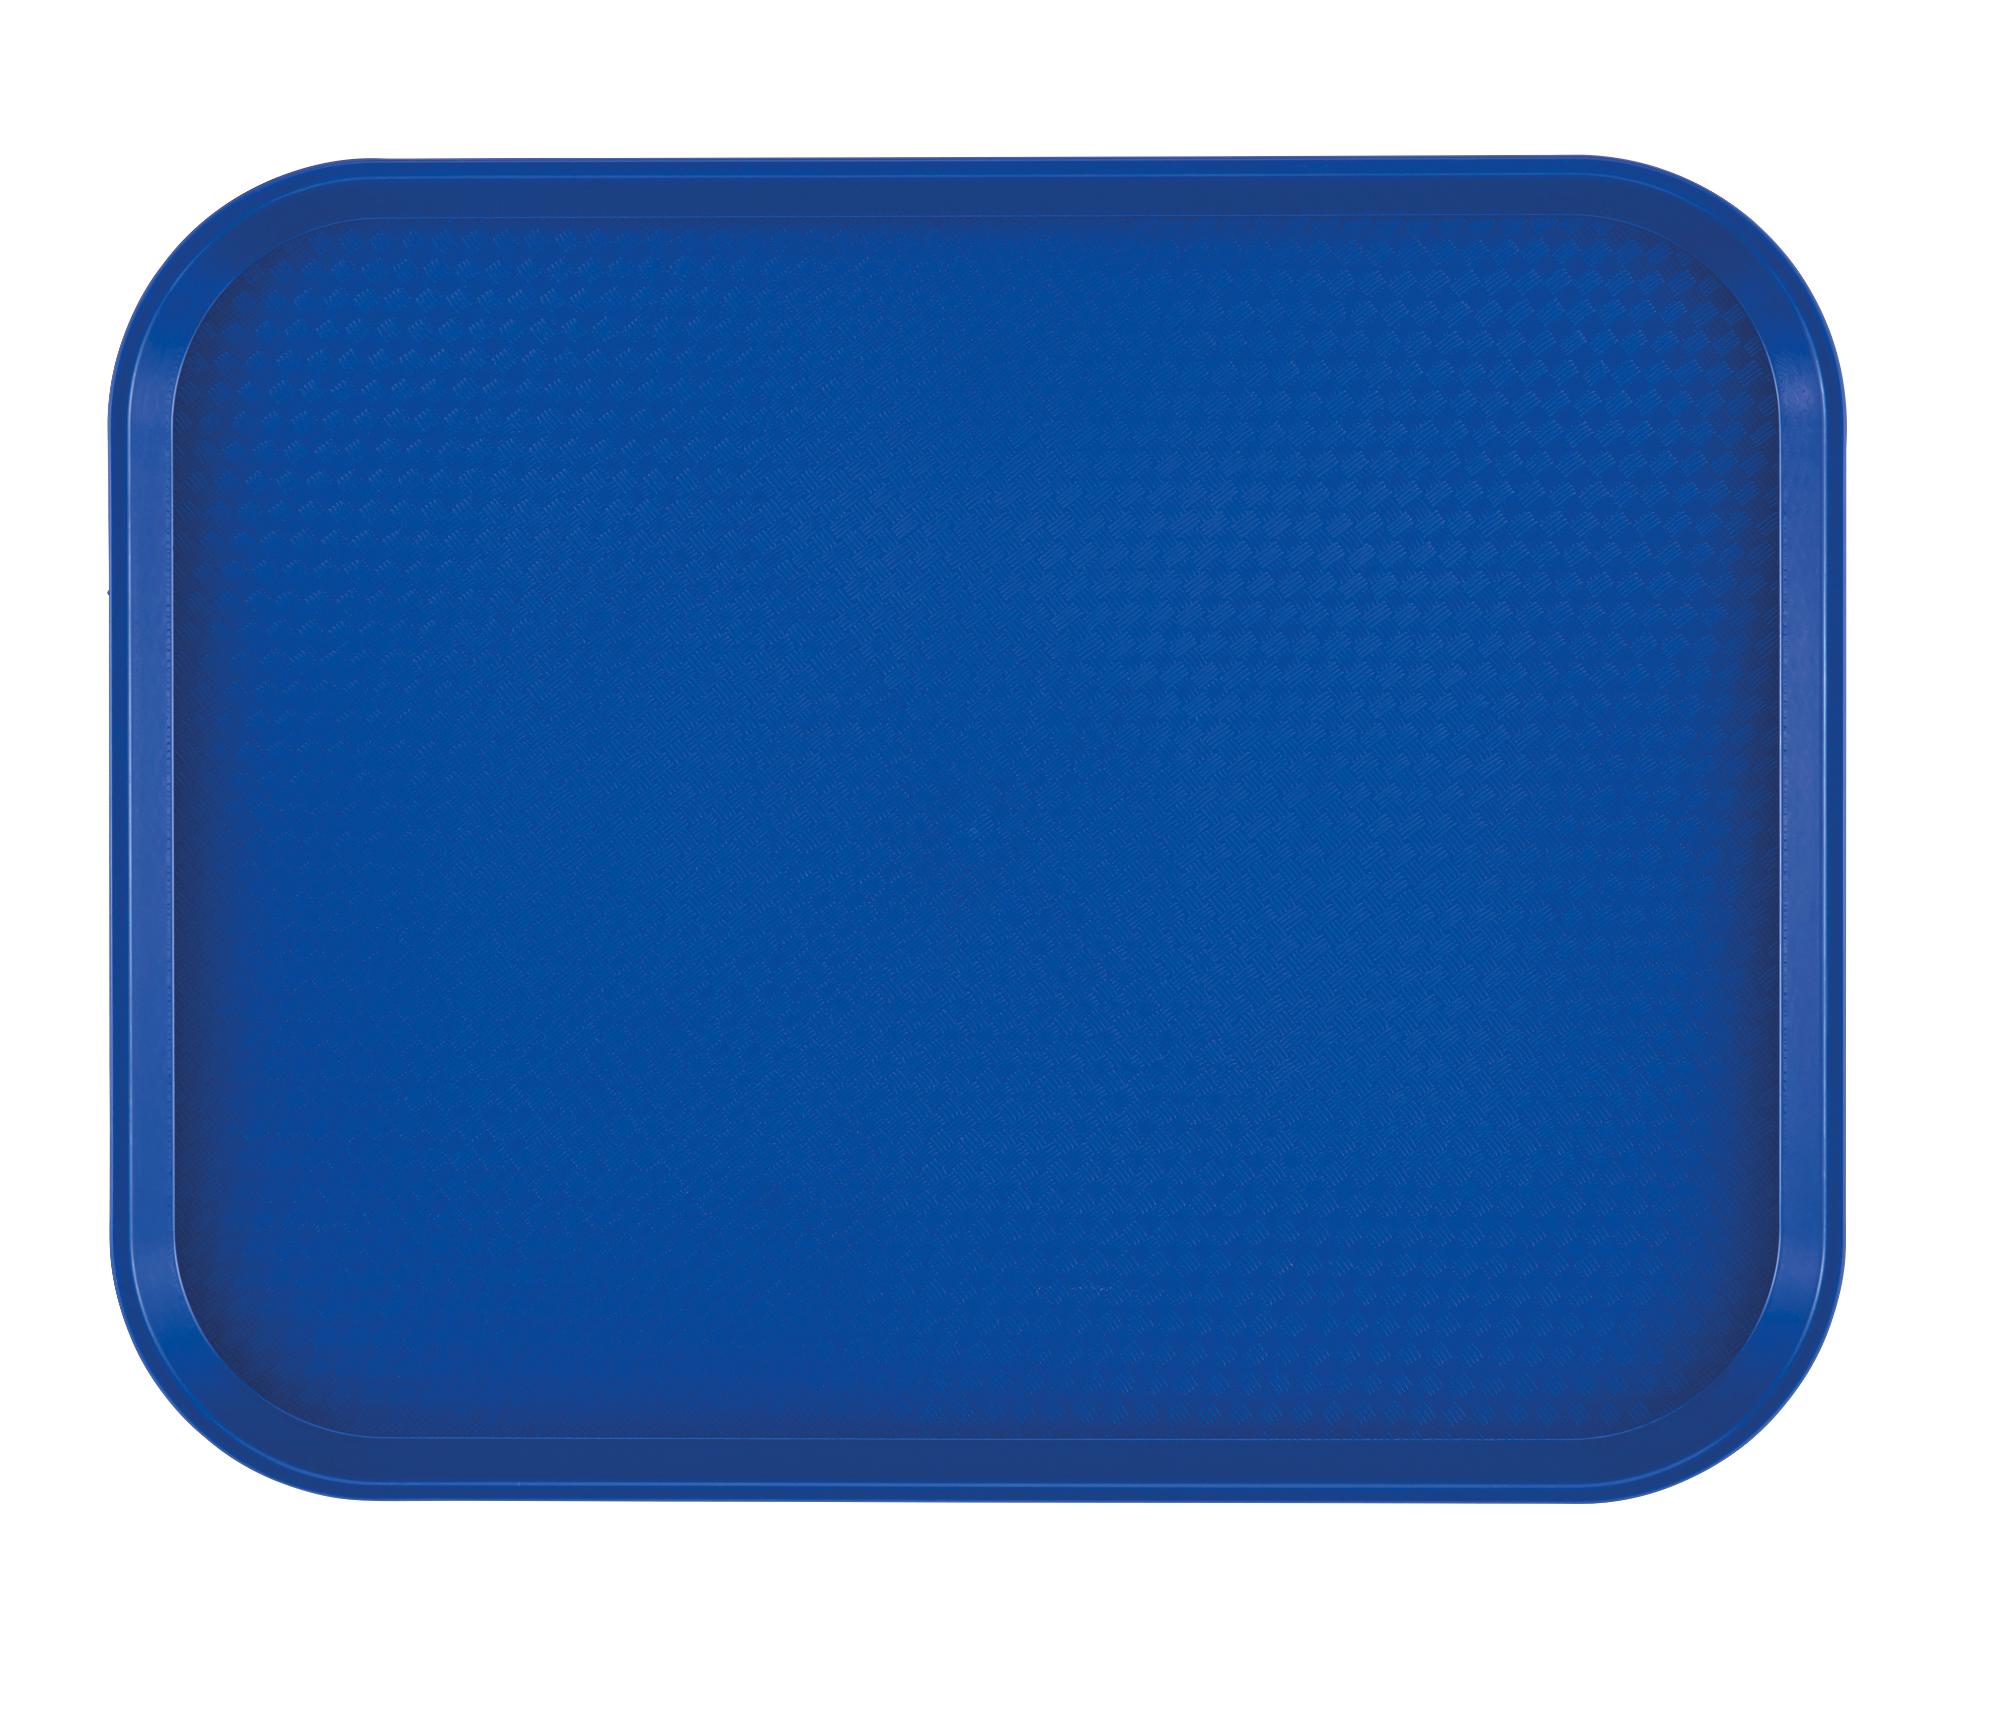 Fast Food polypropylene tray, textured surface, navy, 355x457 mm